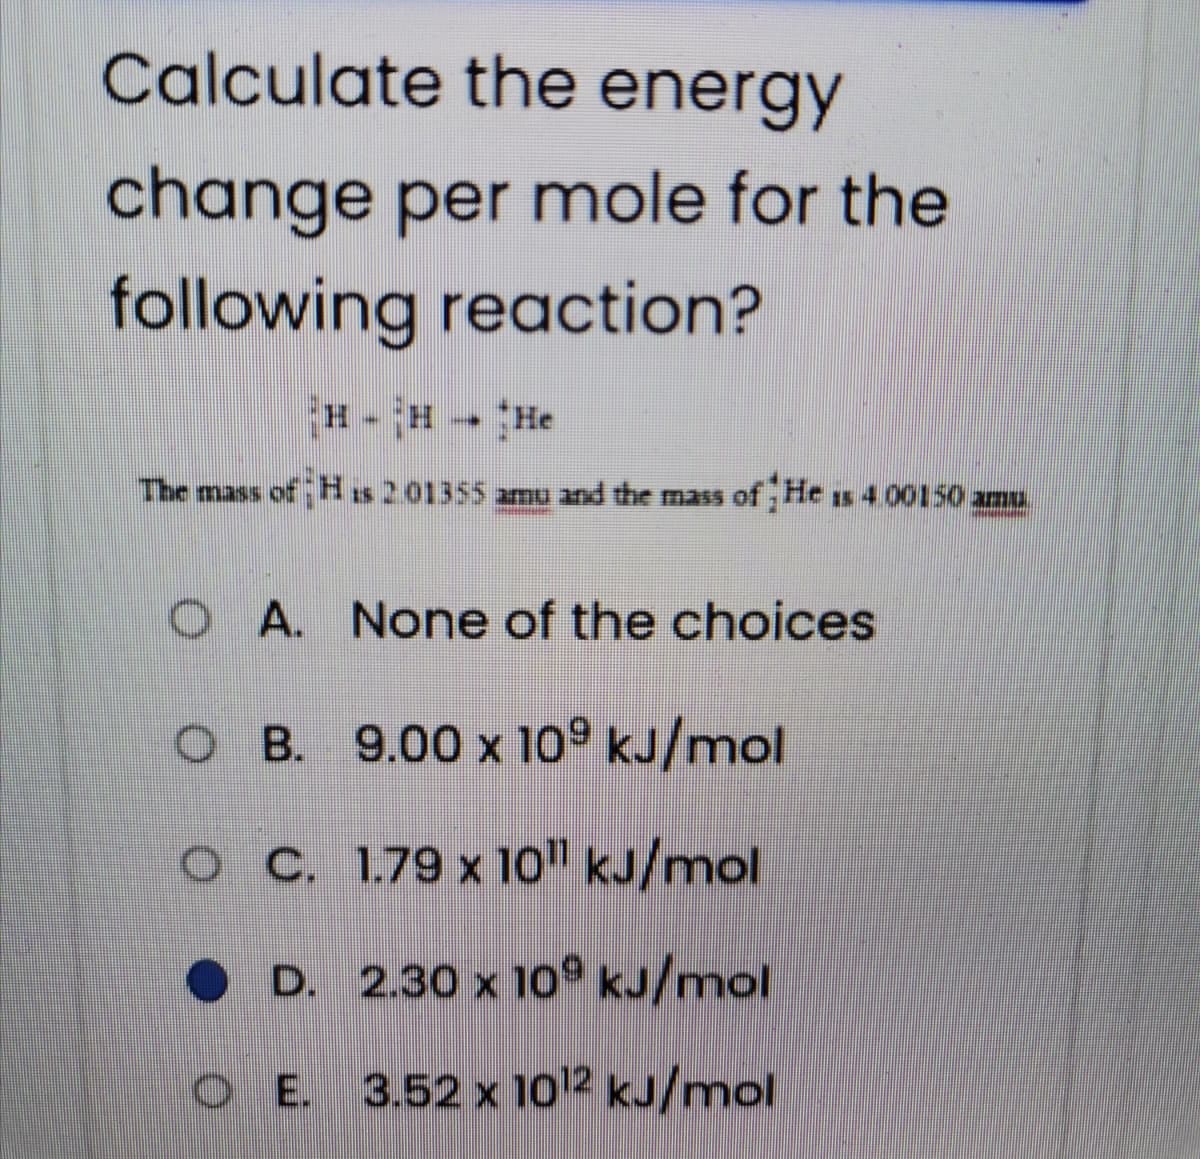 Calculate the energy
change per mole for the
following reaction?
H - H He
The mass of H is 2 01355 amu and the mas of He s 4 00150 amu.
O A. None of the choices
OB. 9.00 x 10° kJ/mol
OC 1.79 x 1o" kJ/mol
• D. 2.30 x 109 kJ/mol
O E. 3.52 x 1012 kJ/mol
